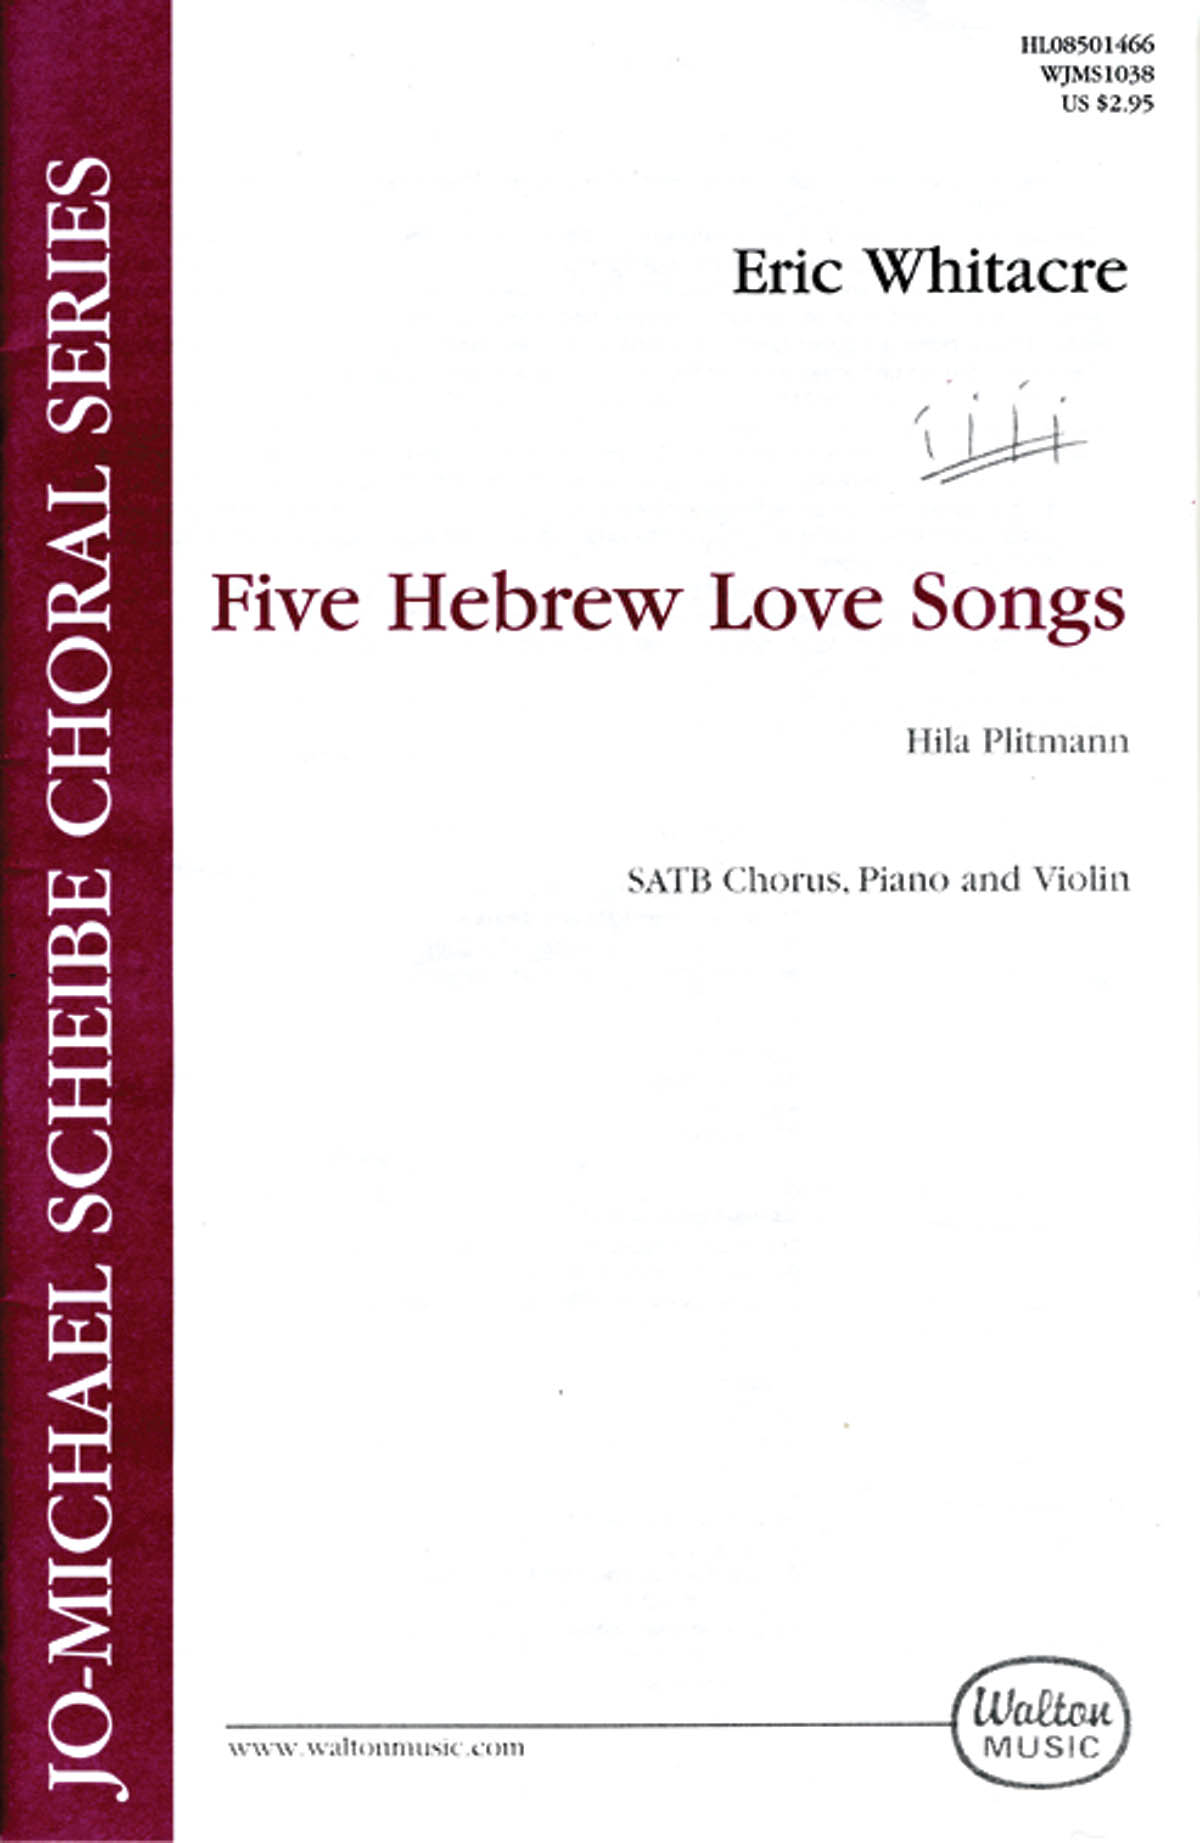 Eric Whitacre: Five Hebrew Love Songs (SATB)